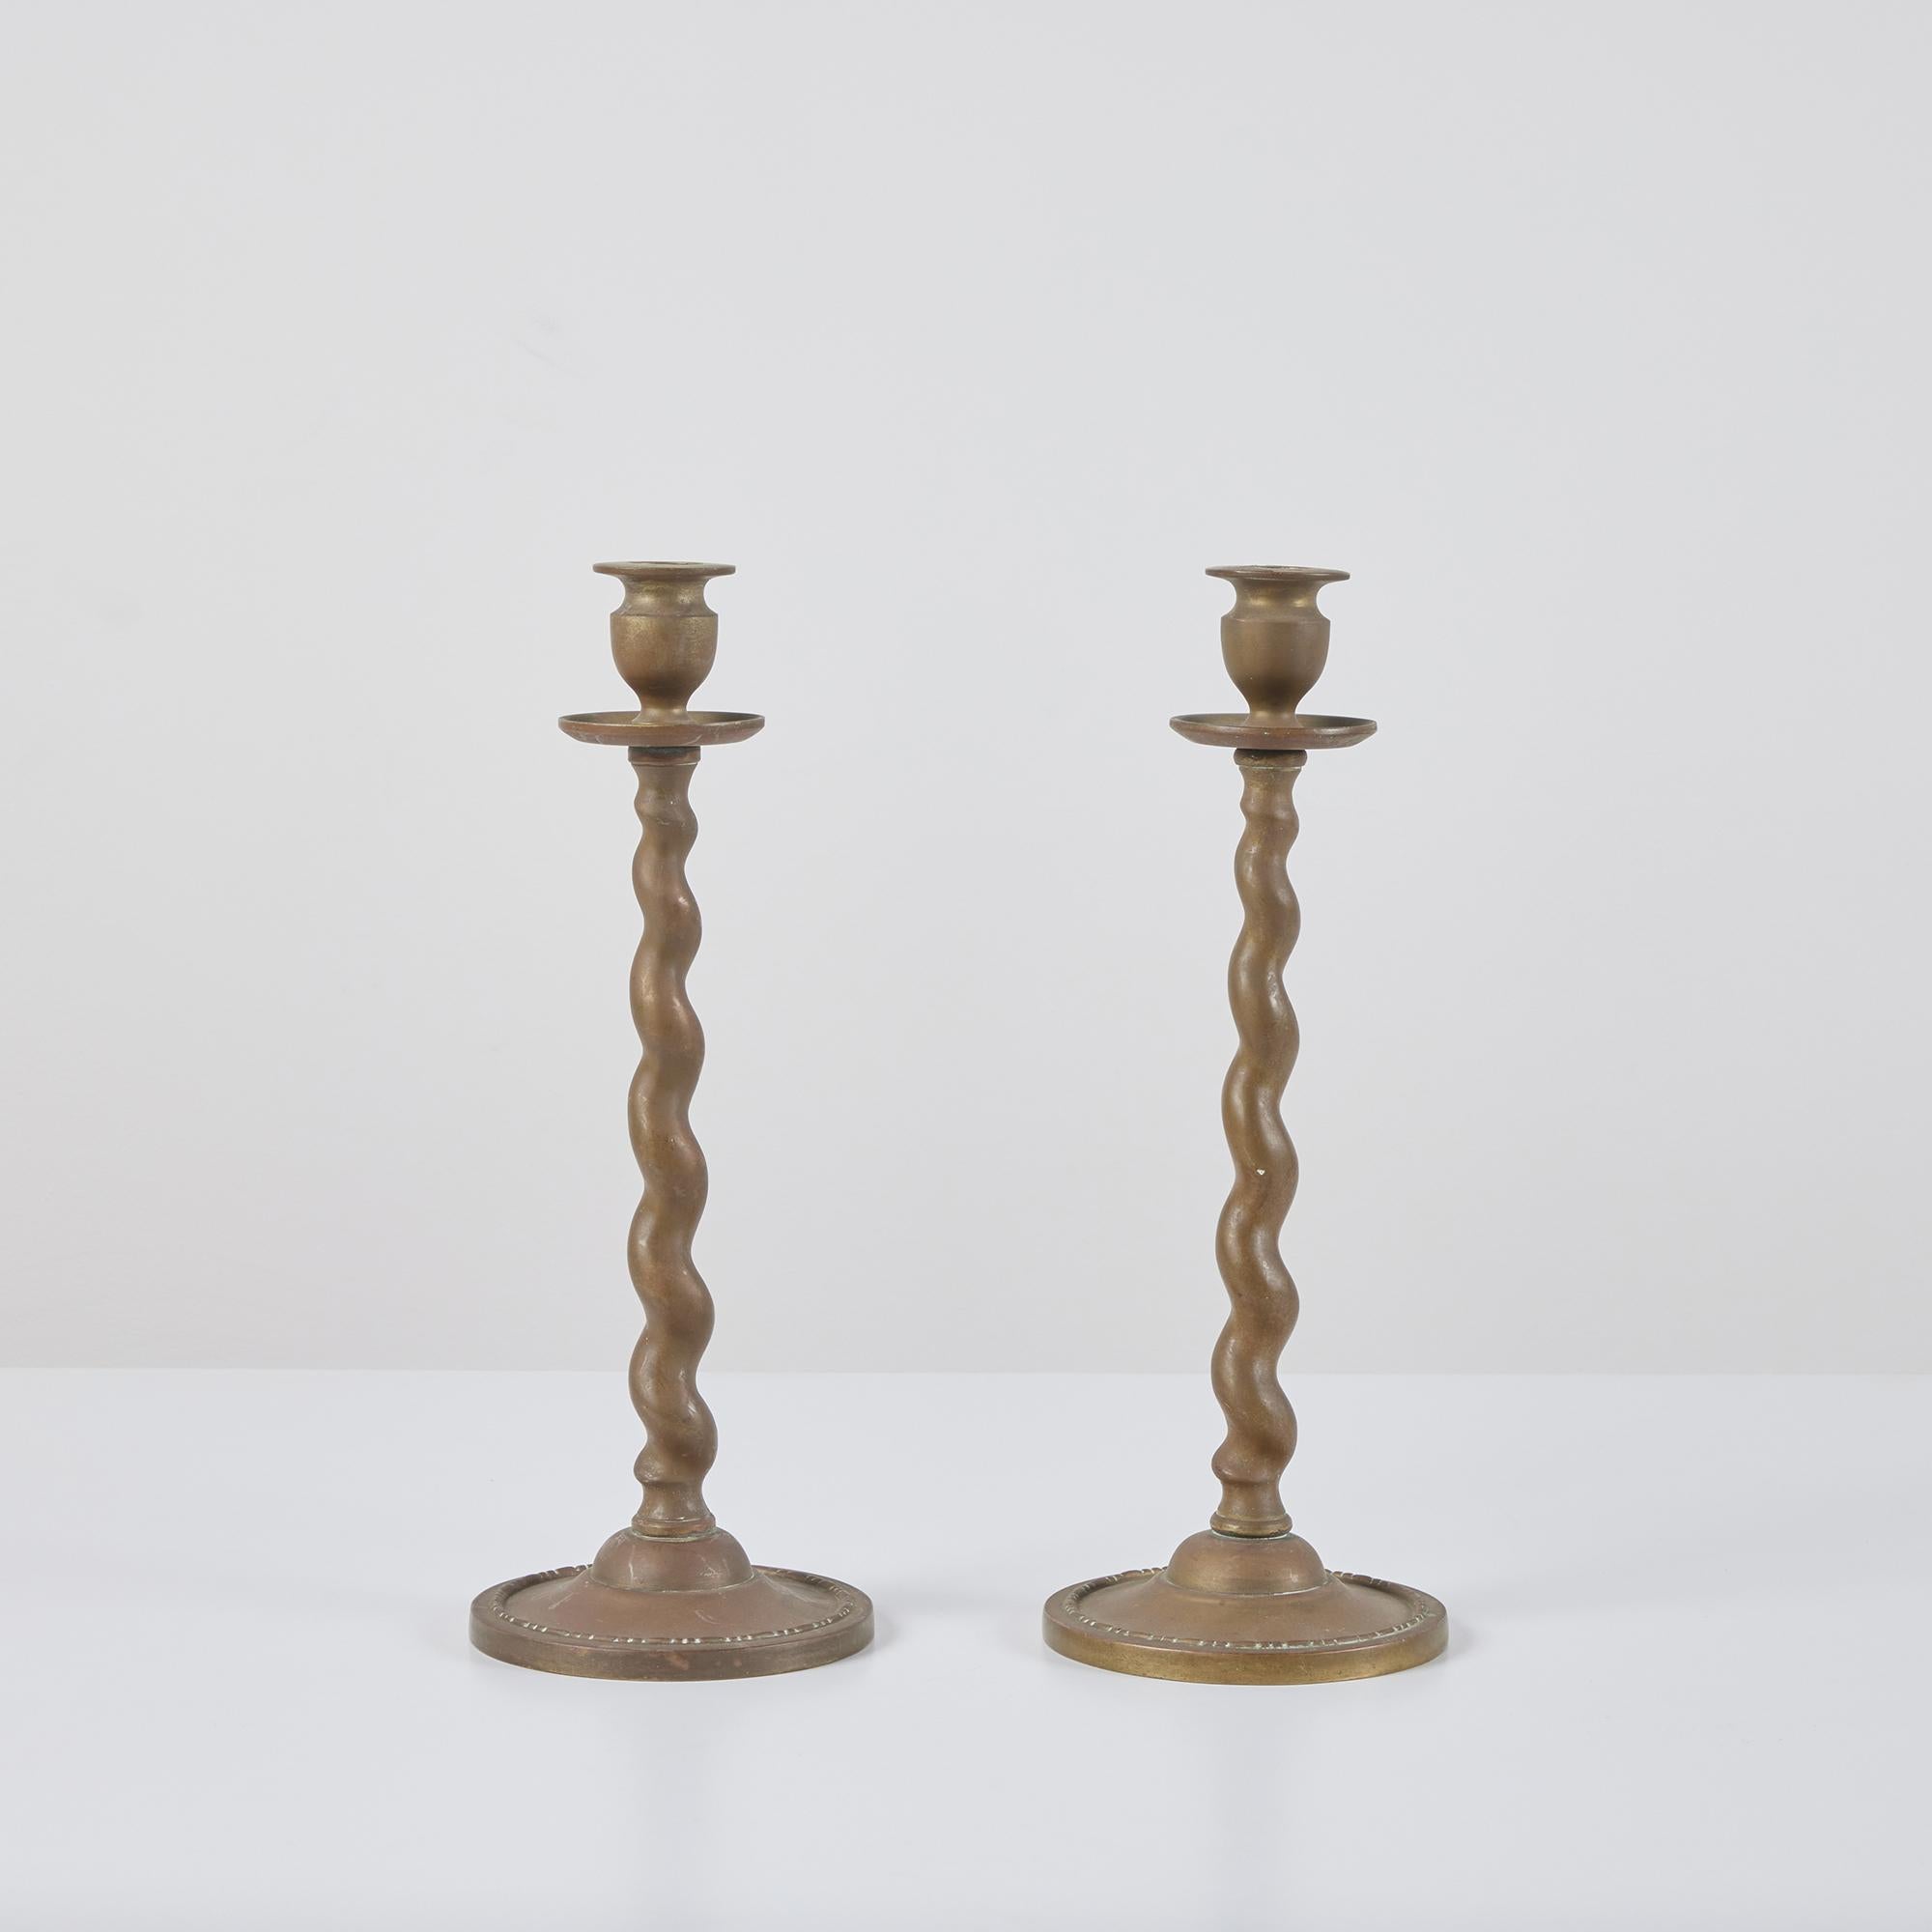 Pair of solid brass candlesticks, in the style of Peerage, England. The pair of beautifully patinated candlesticks feature barley twist stems and round tiered bases.

Dimensions
5.25